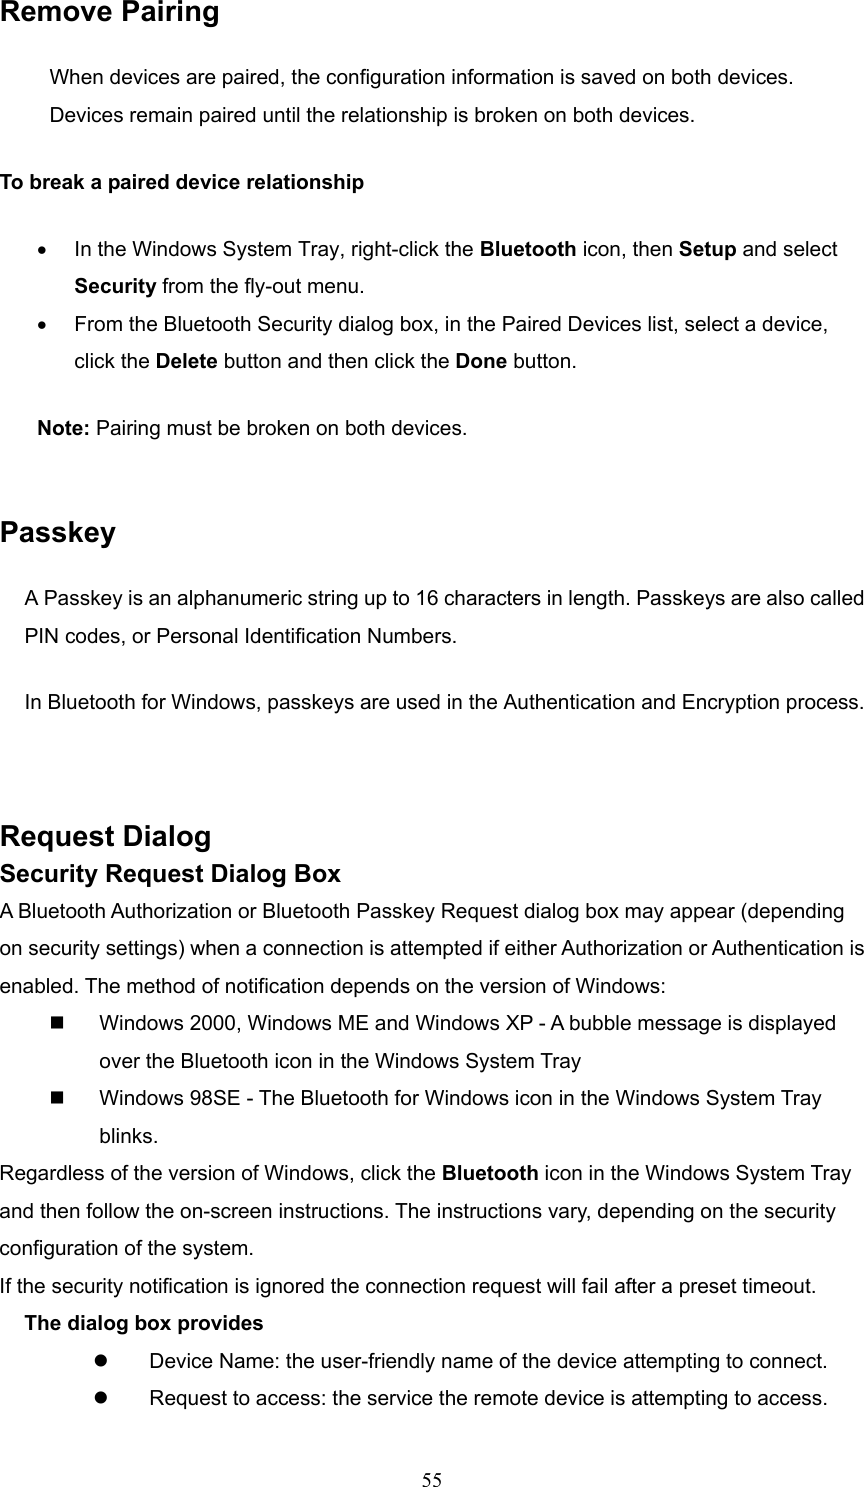  55 Remove Pairing When devices are paired, the configuration information is saved on both devices. Devices remain paired until the relationship is broken on both devices. To break a paired device relationship •  In the Windows System Tray, right-click the Bluetooth icon, then Setup and select Security from the fly-out menu. •  From the Bluetooth Security dialog box, in the Paired Devices list, select a device, click the Delete button and then click the Done button. Note: Pairing must be broken on both devices.  Passkey A Passkey is an alphanumeric string up to 16 characters in length. Passkeys are also called PIN codes, or Personal Identification Numbers. In Bluetooth for Windows, passkeys are used in the Authentication and Encryption process.  Request Dialog   Security Request Dialog Box A Bluetooth Authorization or Bluetooth Passkey Request dialog box may appear (depending on security settings) when a connection is attempted if either Authorization or Authentication is enabled. The method of notification depends on the version of Windows:   Windows 2000, Windows ME and Windows XP - A bubble message is displayed over the Bluetooth icon in the Windows System Tray   Windows 98SE - The Bluetooth for Windows icon in the Windows System Tray blinks. Regardless of the version of Windows, click the Bluetooth icon in the Windows System Tray and then follow the on-screen instructions. The instructions vary, depending on the security configuration of the system. If the security notification is ignored the connection request will fail after a preset timeout. The dialog box provides   Device Name: the user-friendly name of the device attempting to connect.   Request to access: the service the remote device is attempting to access. 